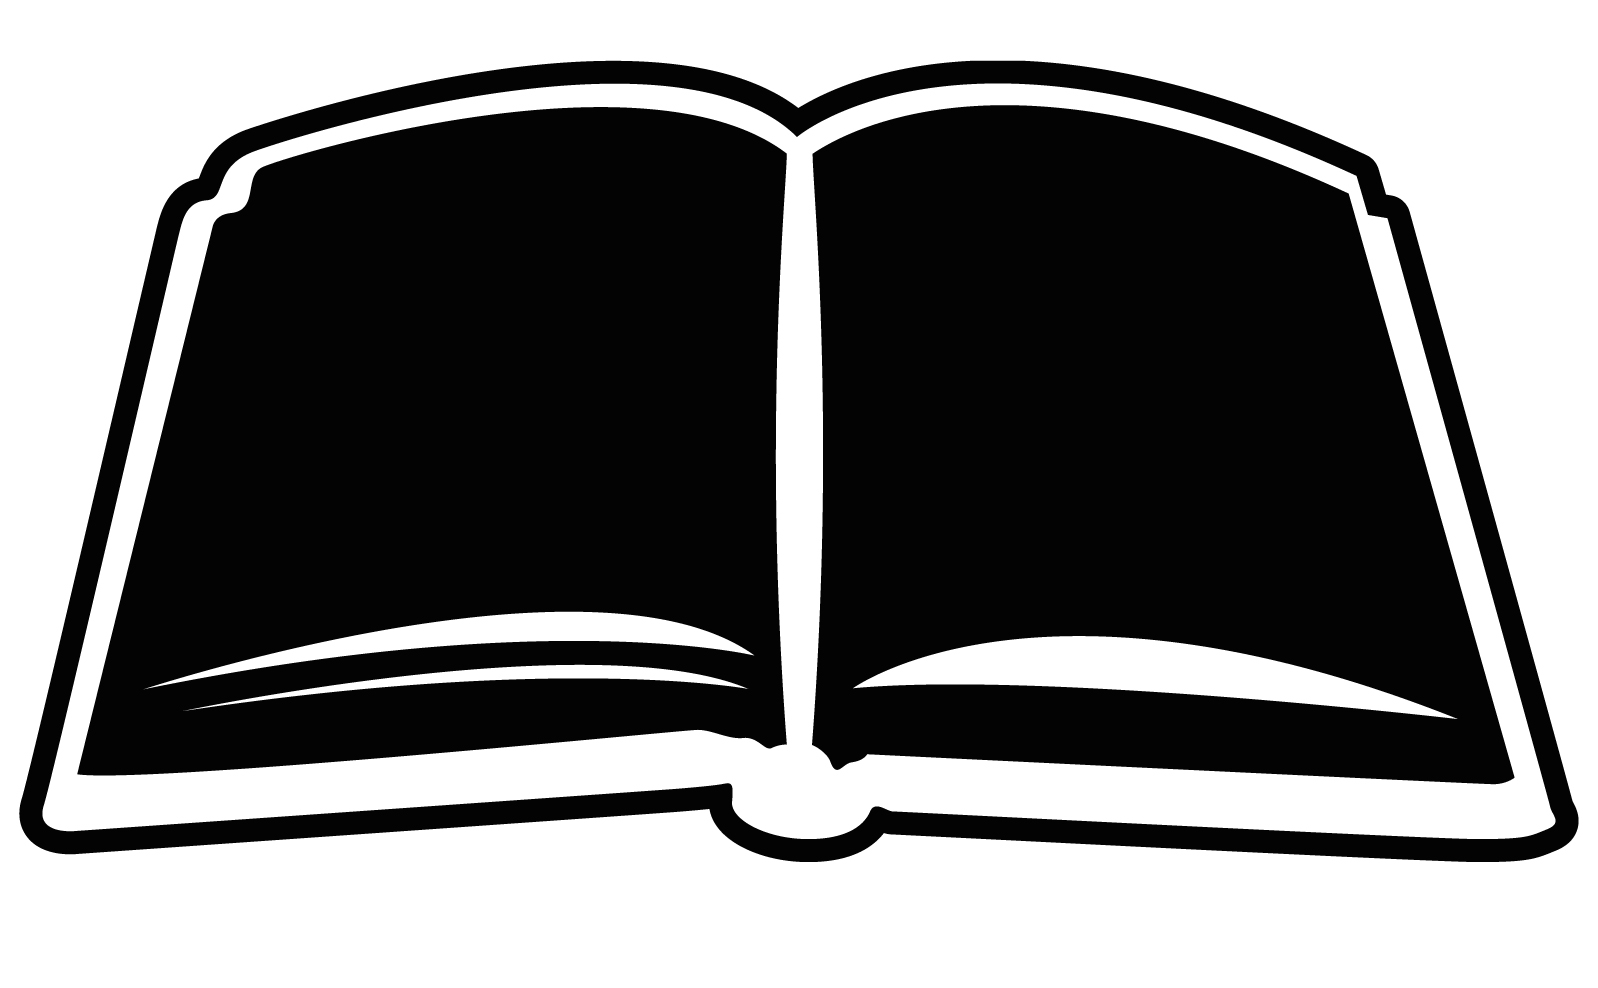 open book clipart black and white - photo #26